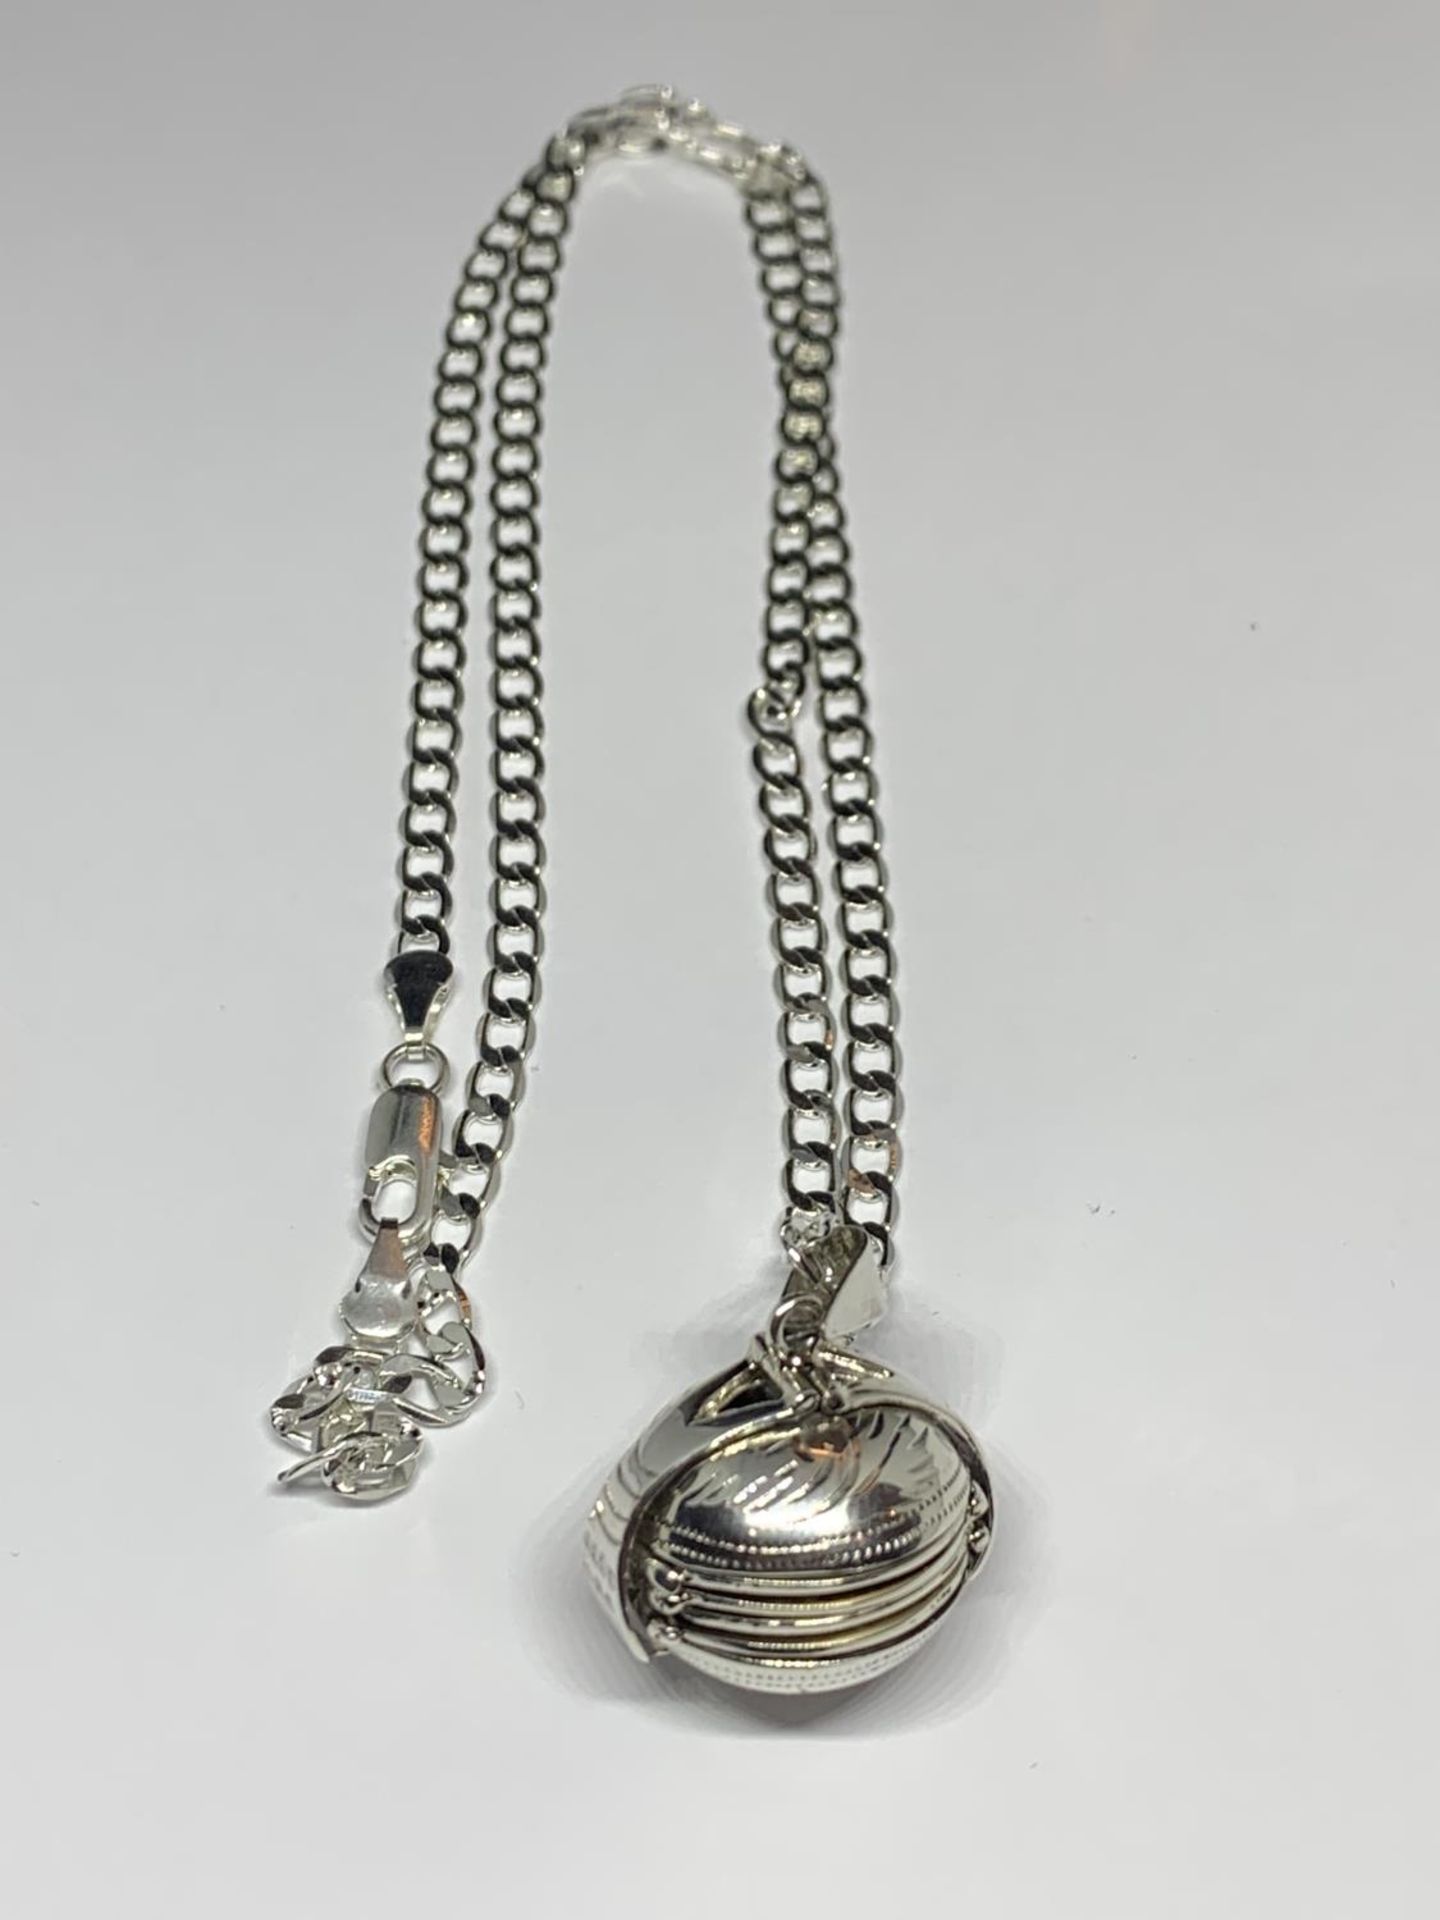 A MARKD SILVER NECKLACE WITH AN ORNATE BALL LOCKET PENDANT - Image 2 of 8